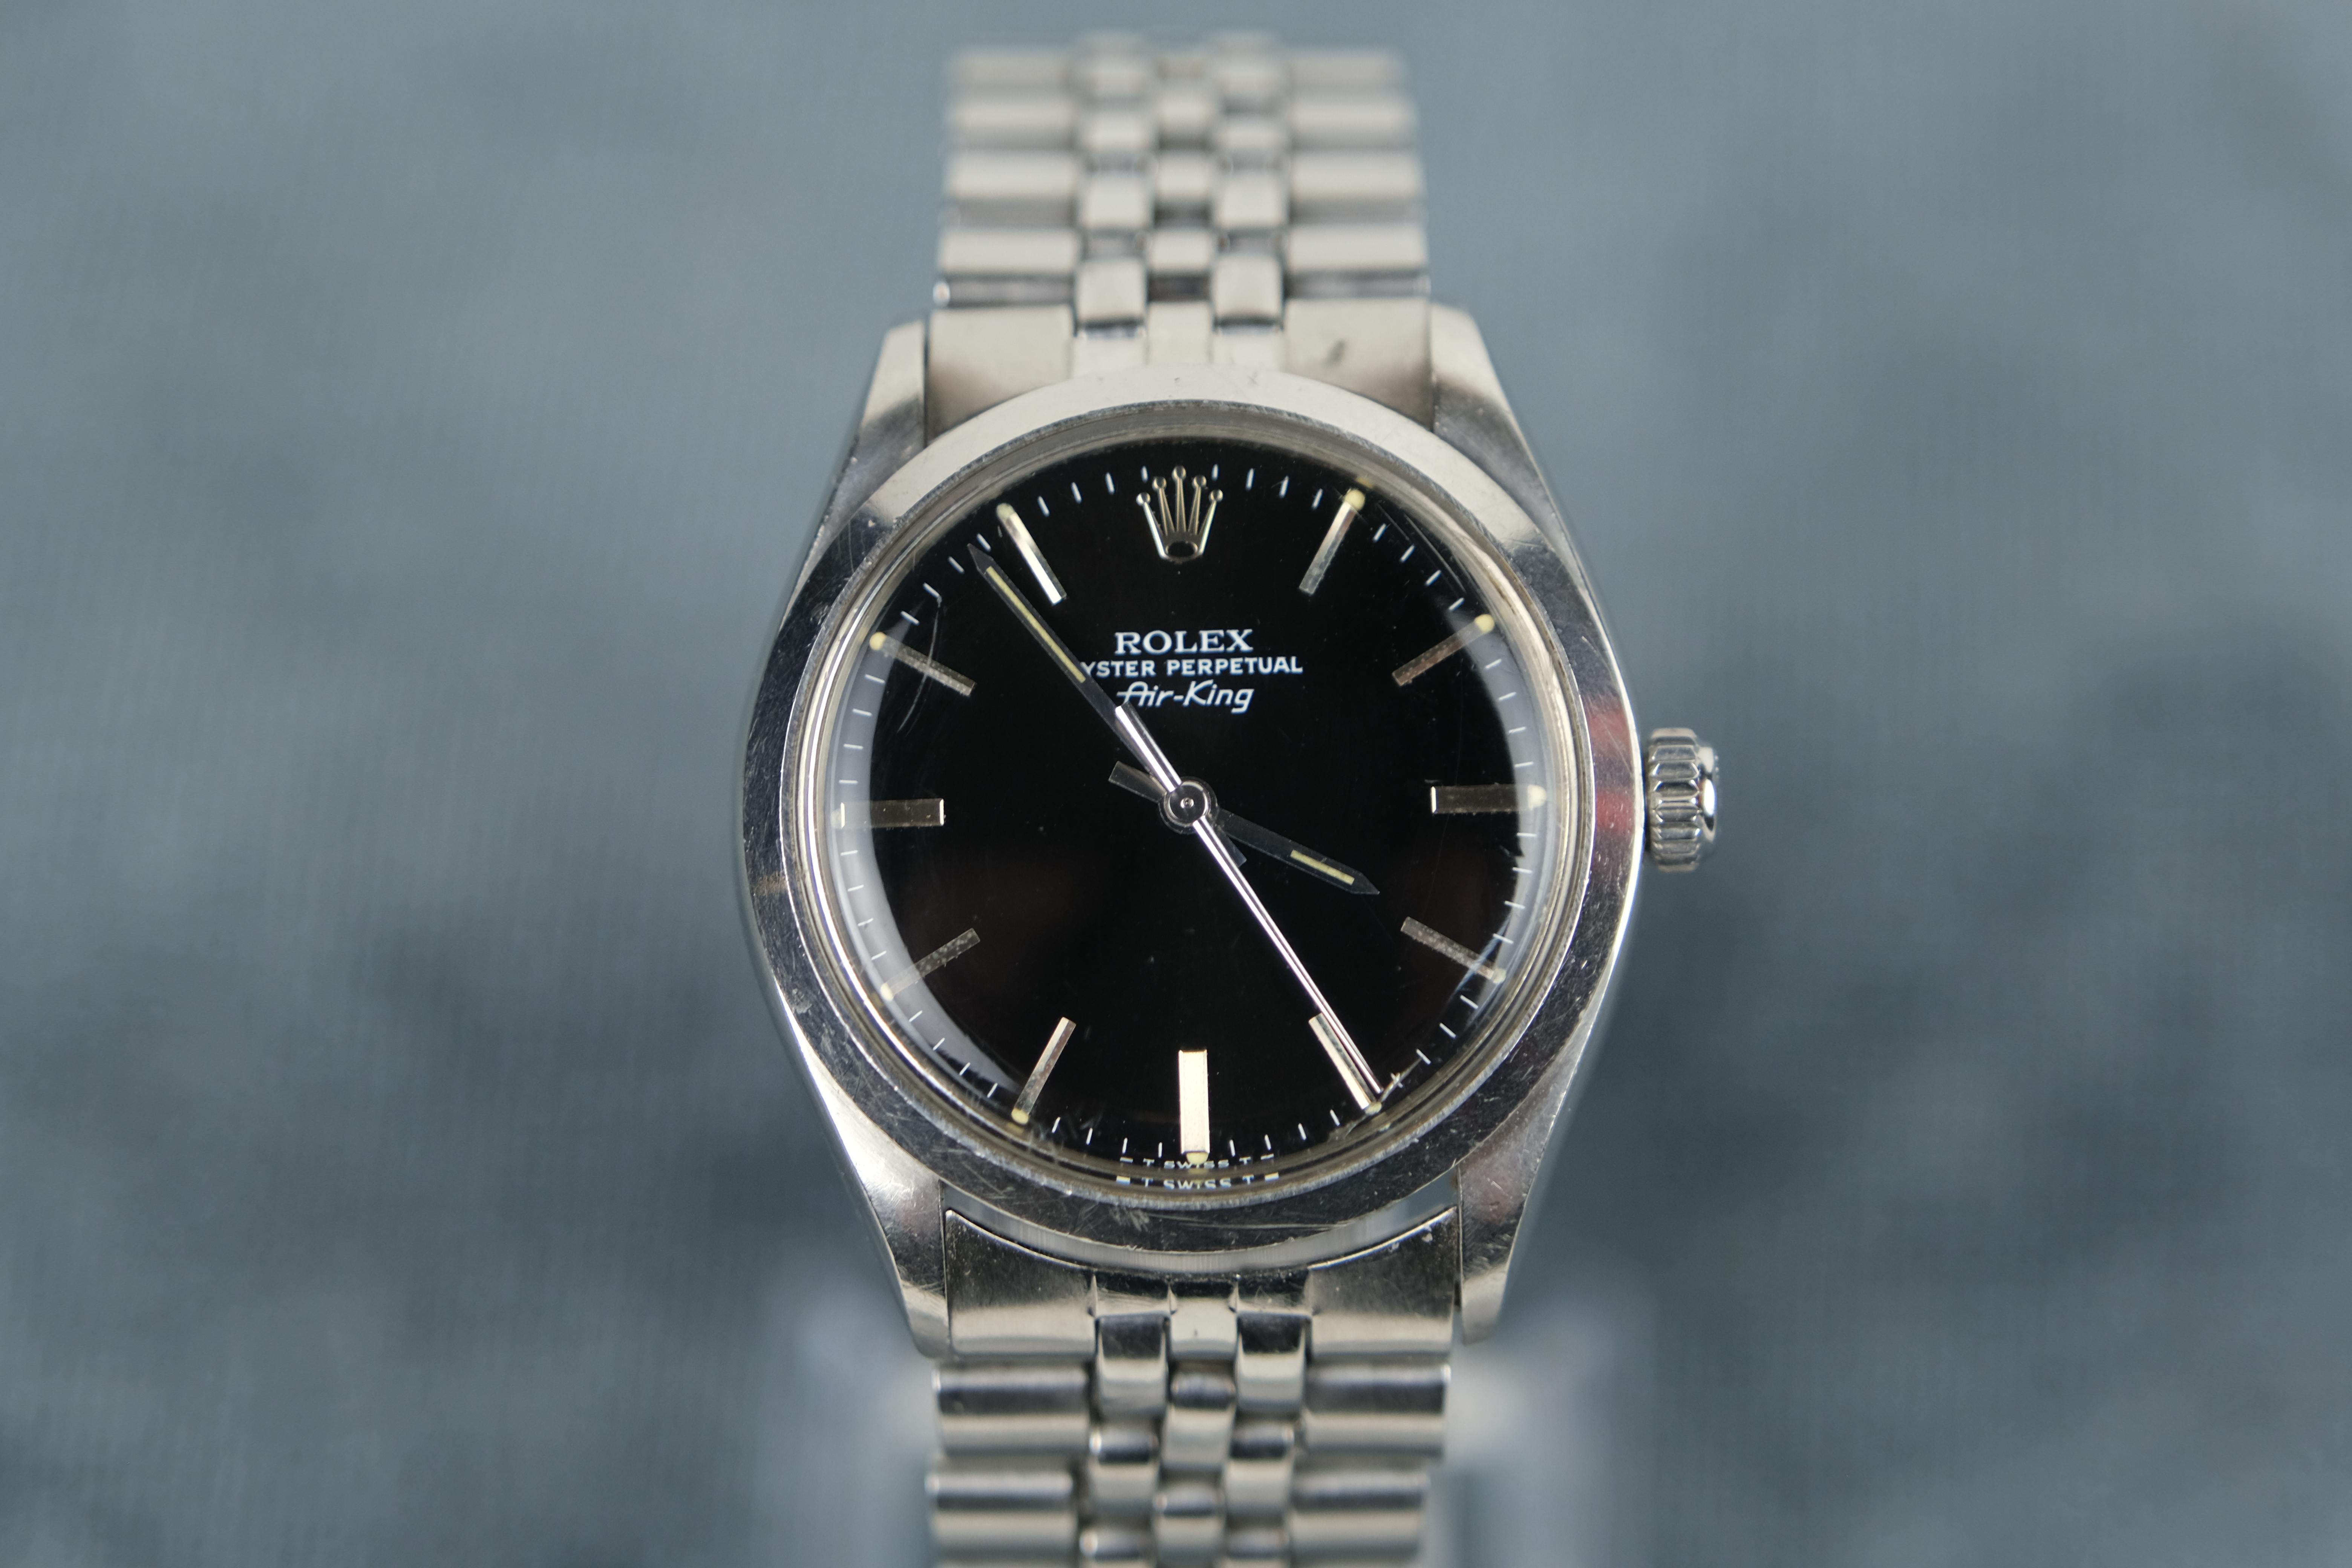 Vintage 1978 Rolex Air King Stainless Automatic

There is no doubting Rolex's position in the world of watchmaking or in modern culture for that matter.

If Rolex watches were cars, they would be Porsches. Porsches are perhaps not as flashy as